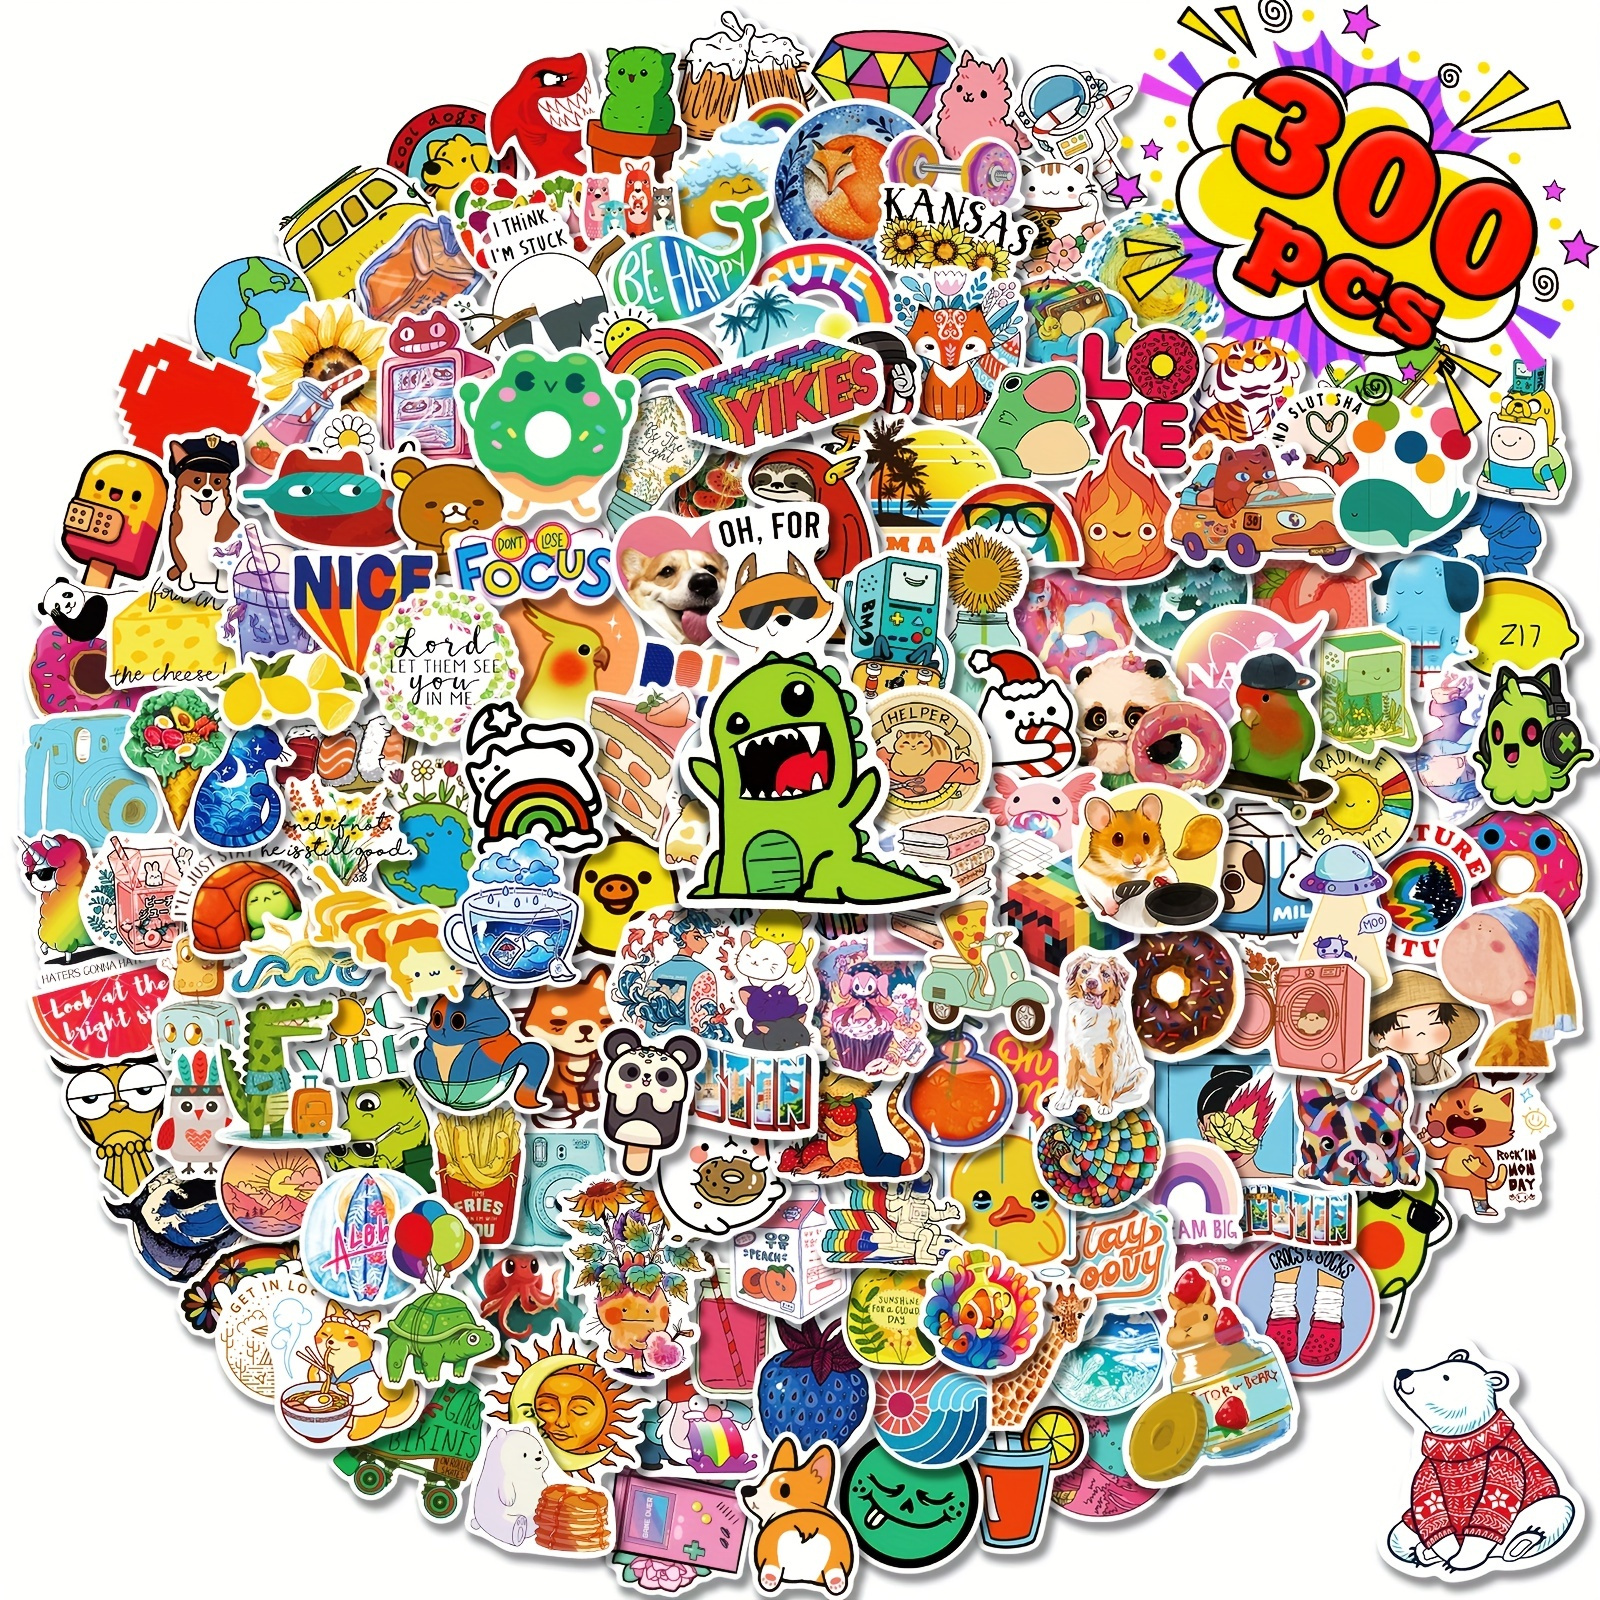 200PCS Stickers for Kids, Aesthetic Vinyl Sticker Packs for Water Bottles  Laptop Computer Skateboard, Preppy Stickers for Teens Girls Adults preppies